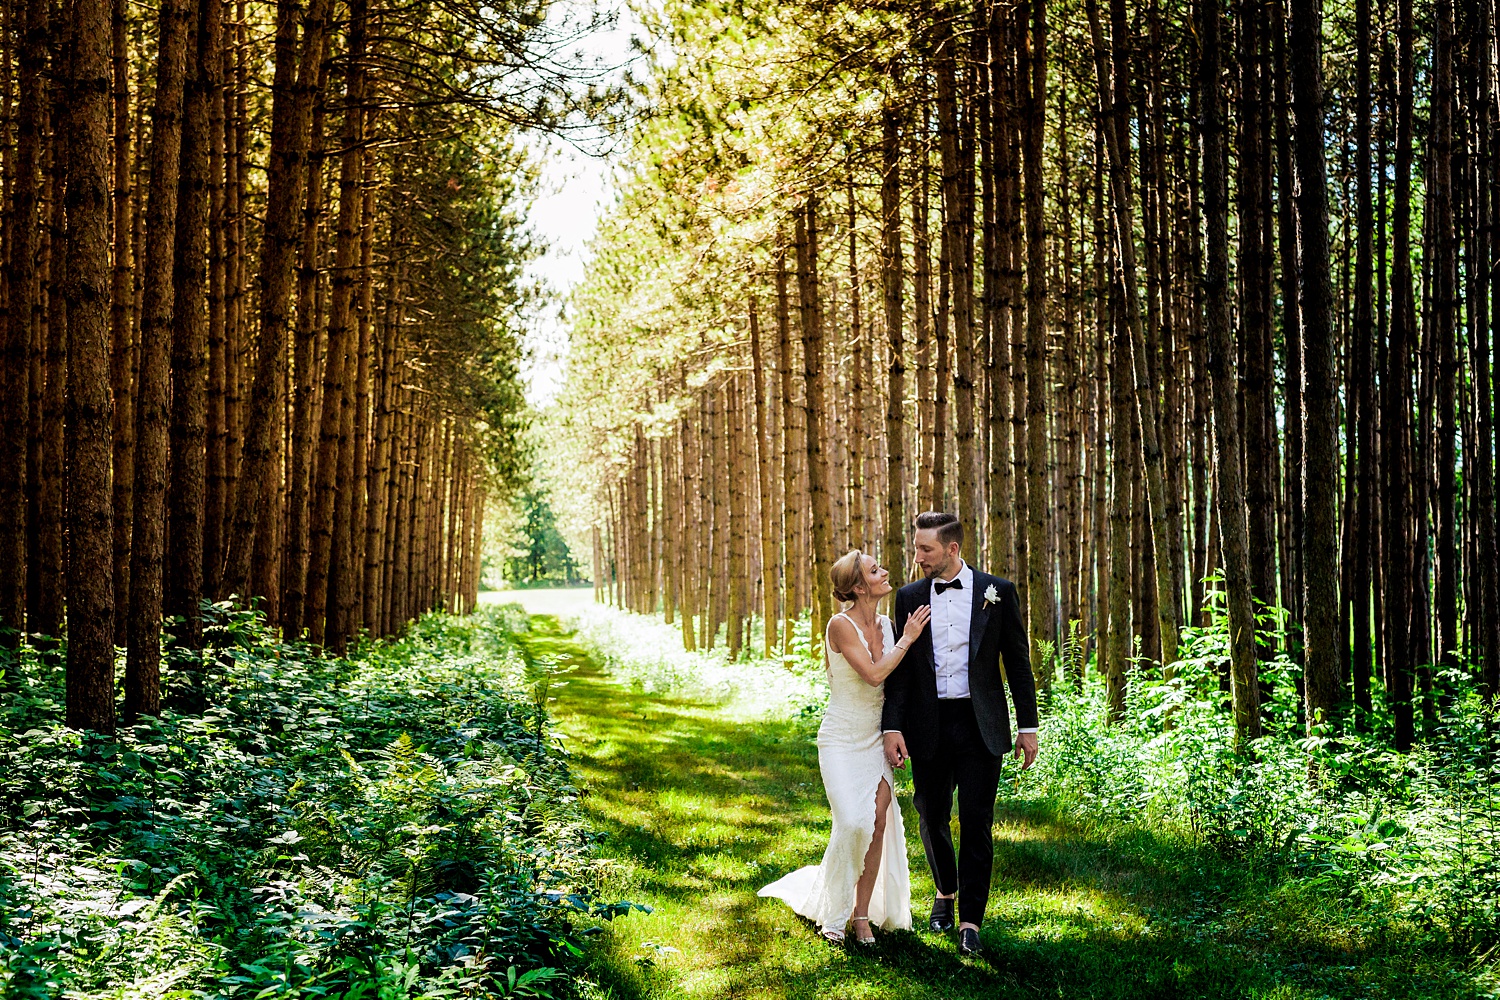 The newlyweds laugh as they walk among the tall trees in the grove at Cunningham Farm in New Glouchester Maine